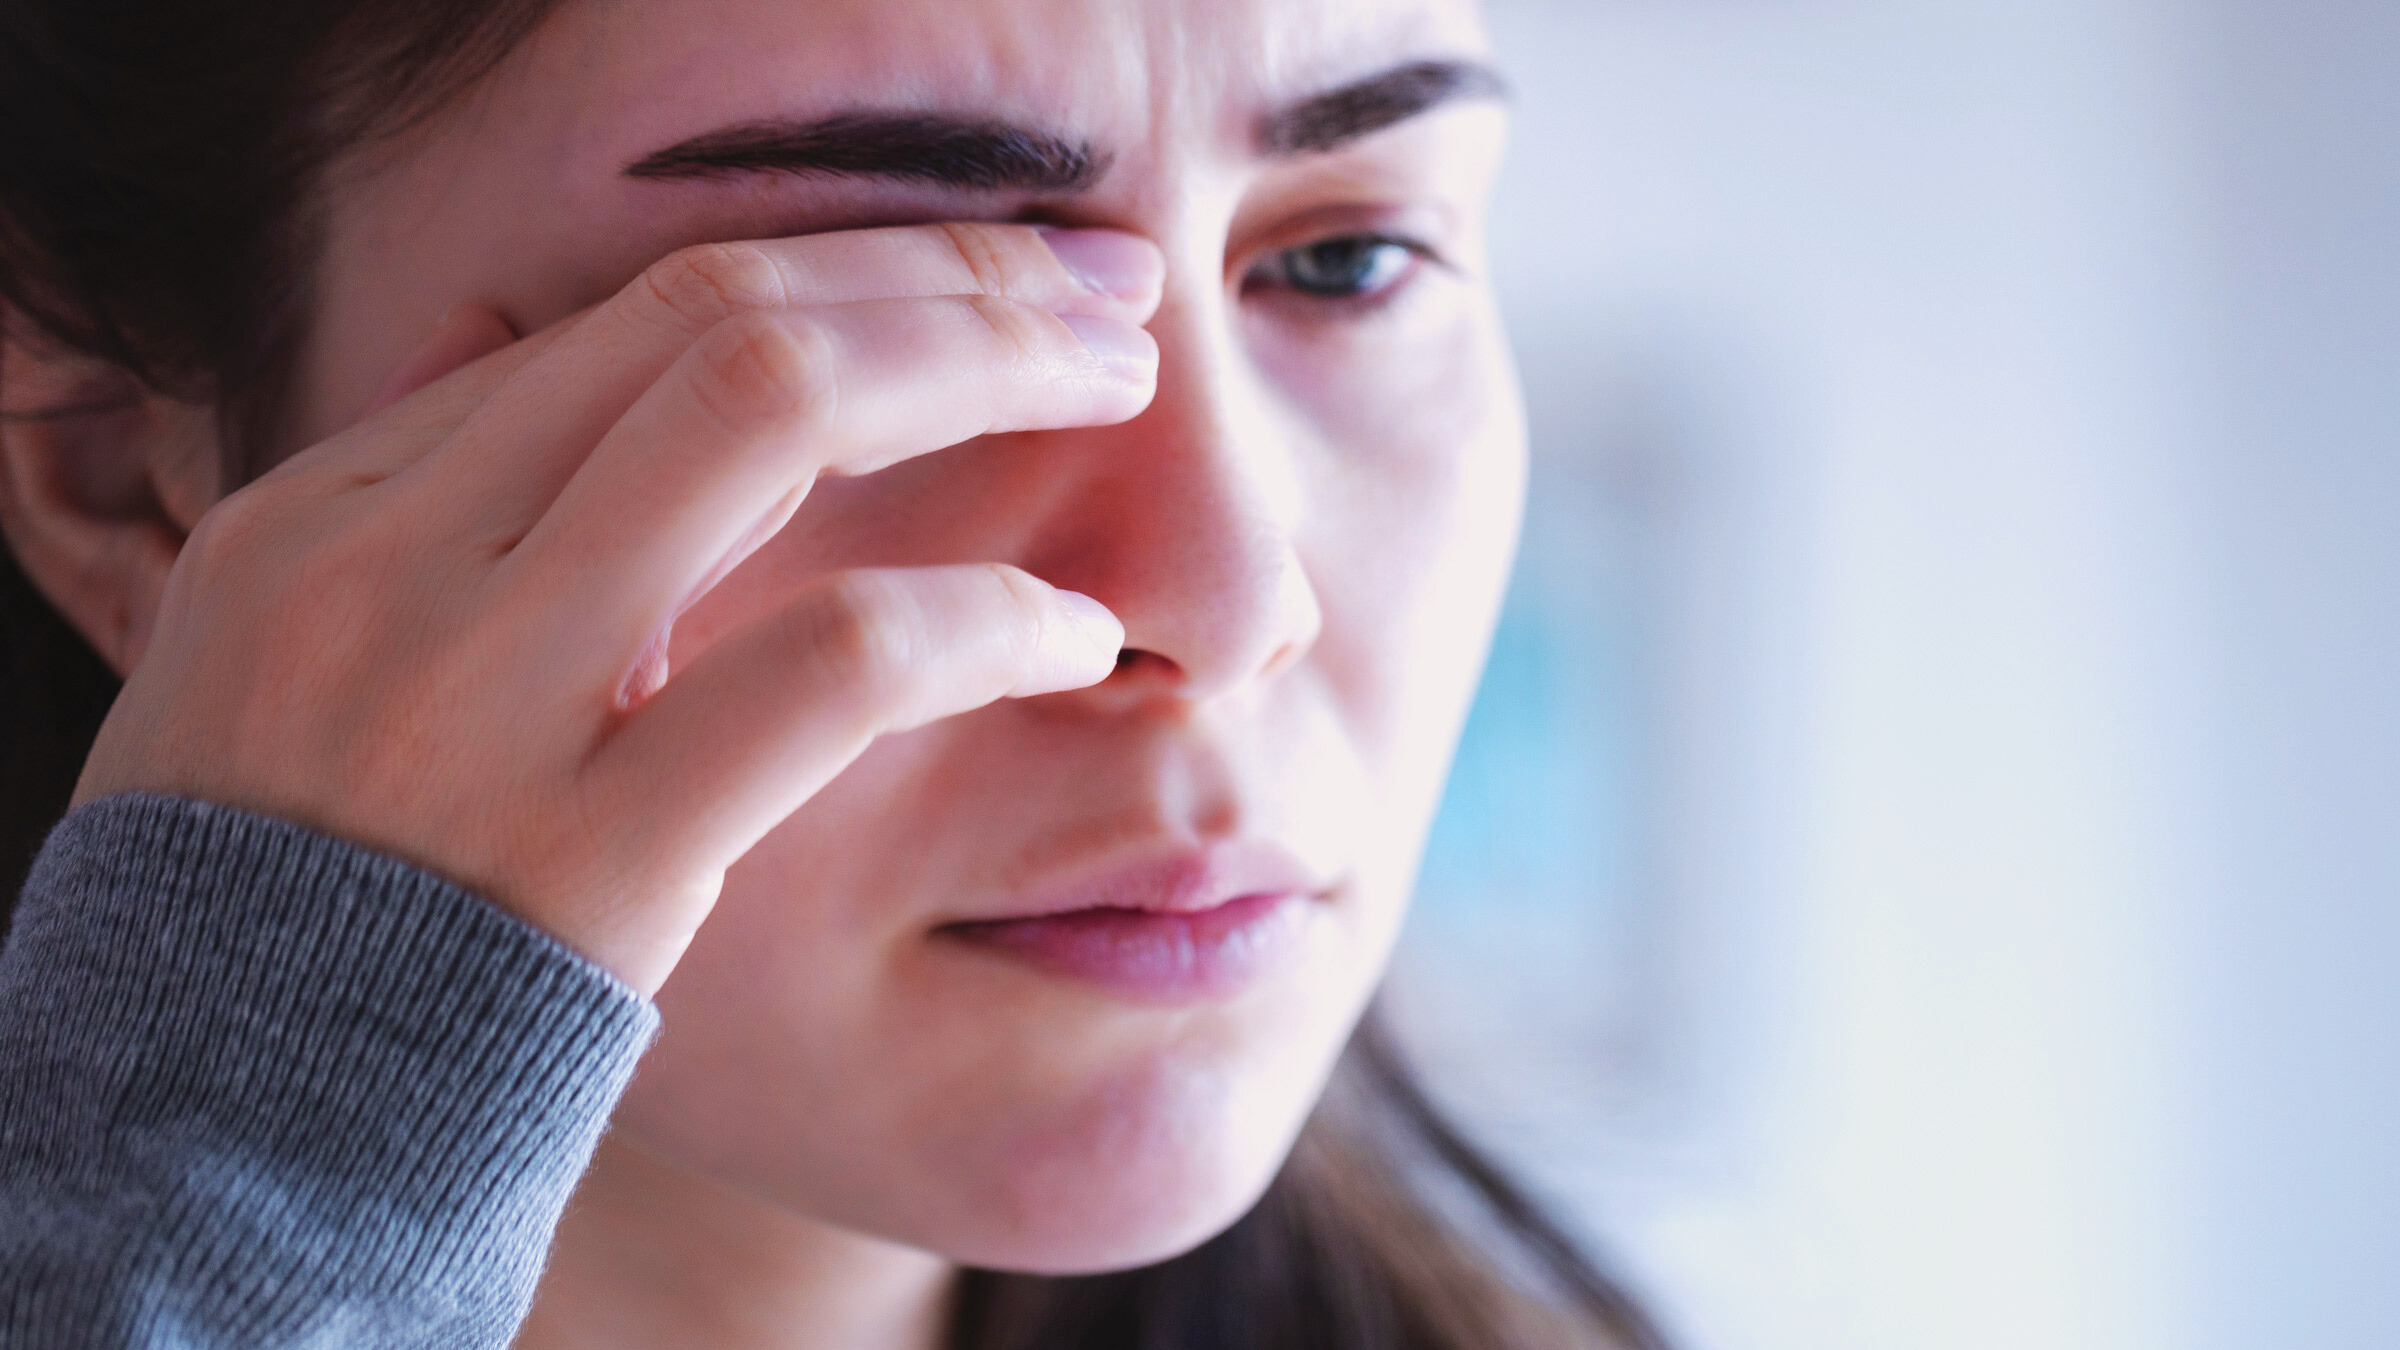 7 Home Remedies for Dry, Itchy Eyes - CNET